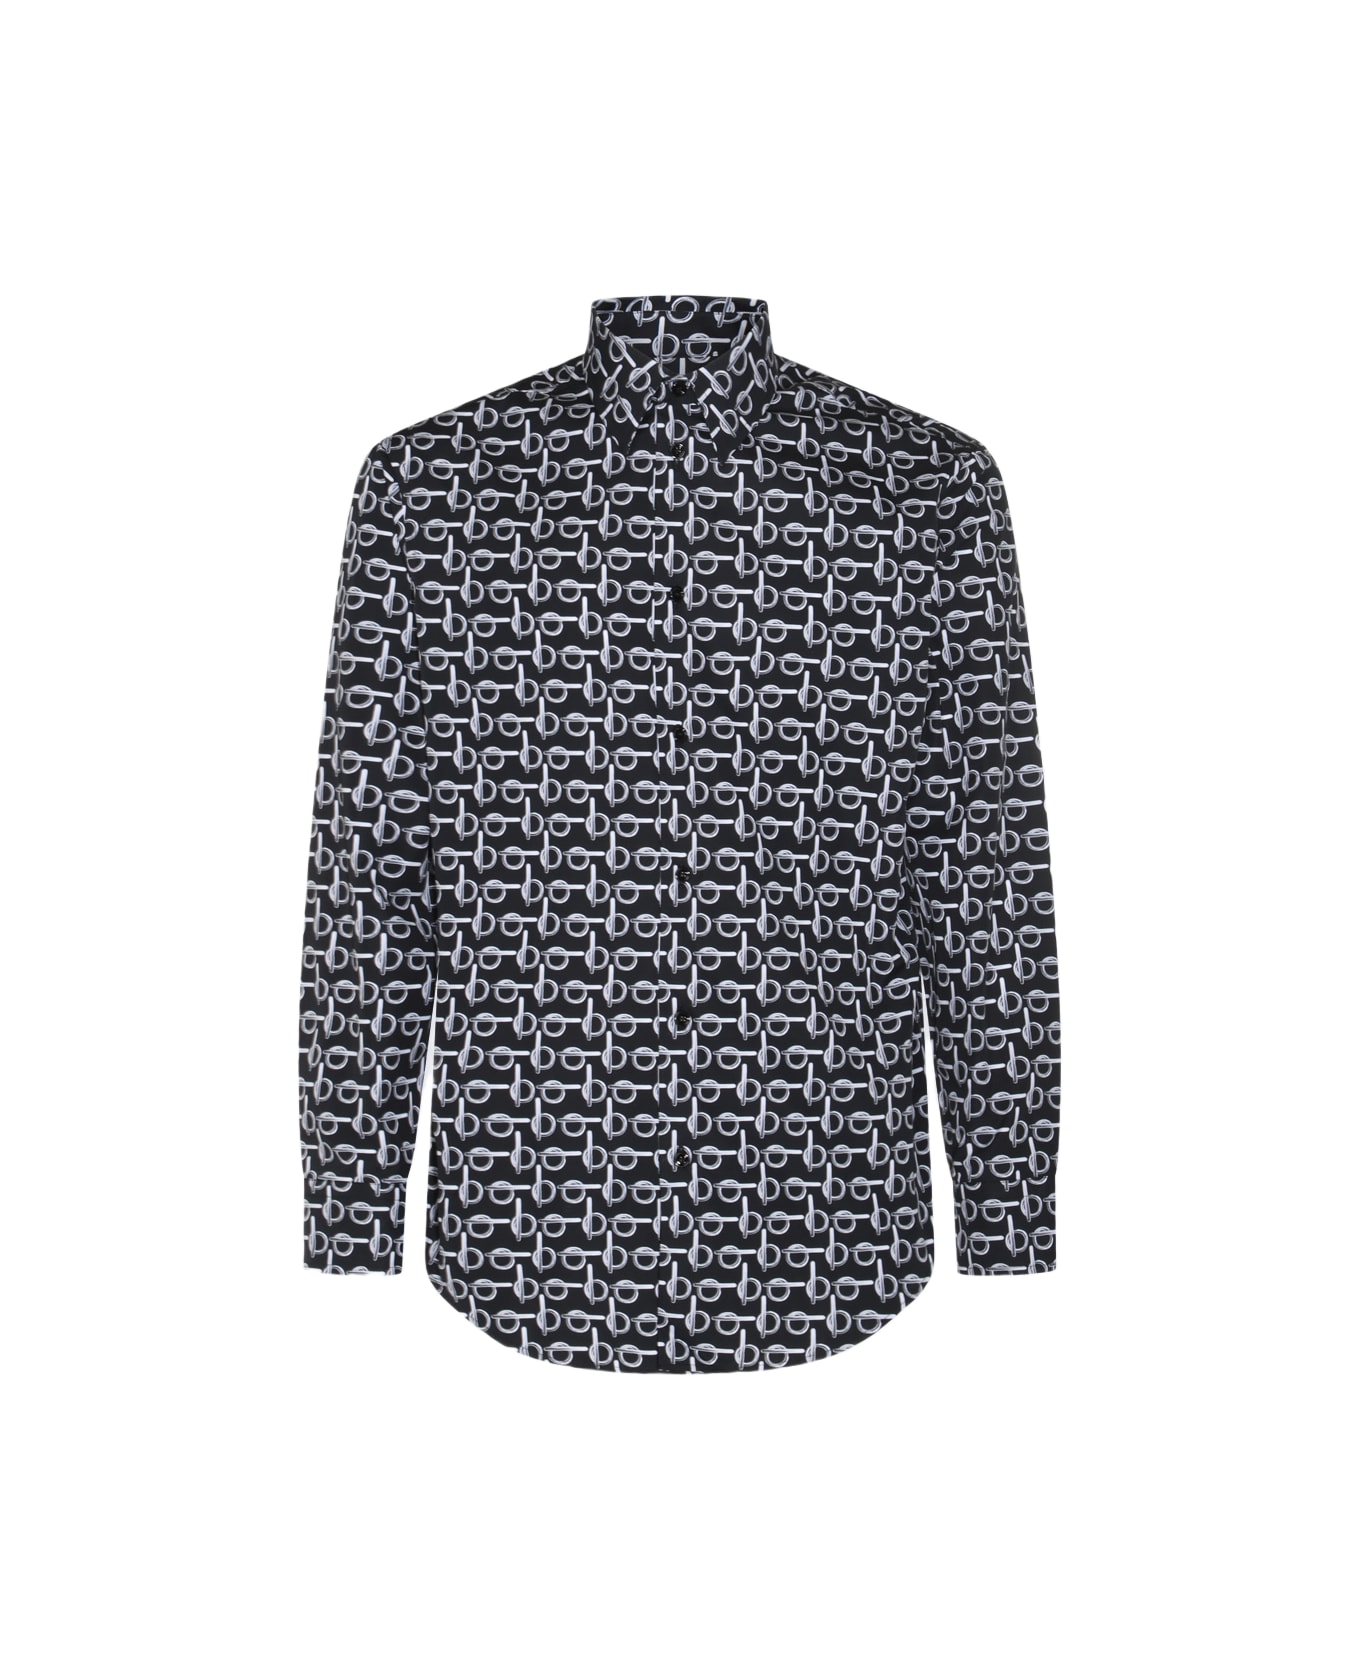 Burberry Black And White Cotton Shirt - SILVER/BLACK シャツ